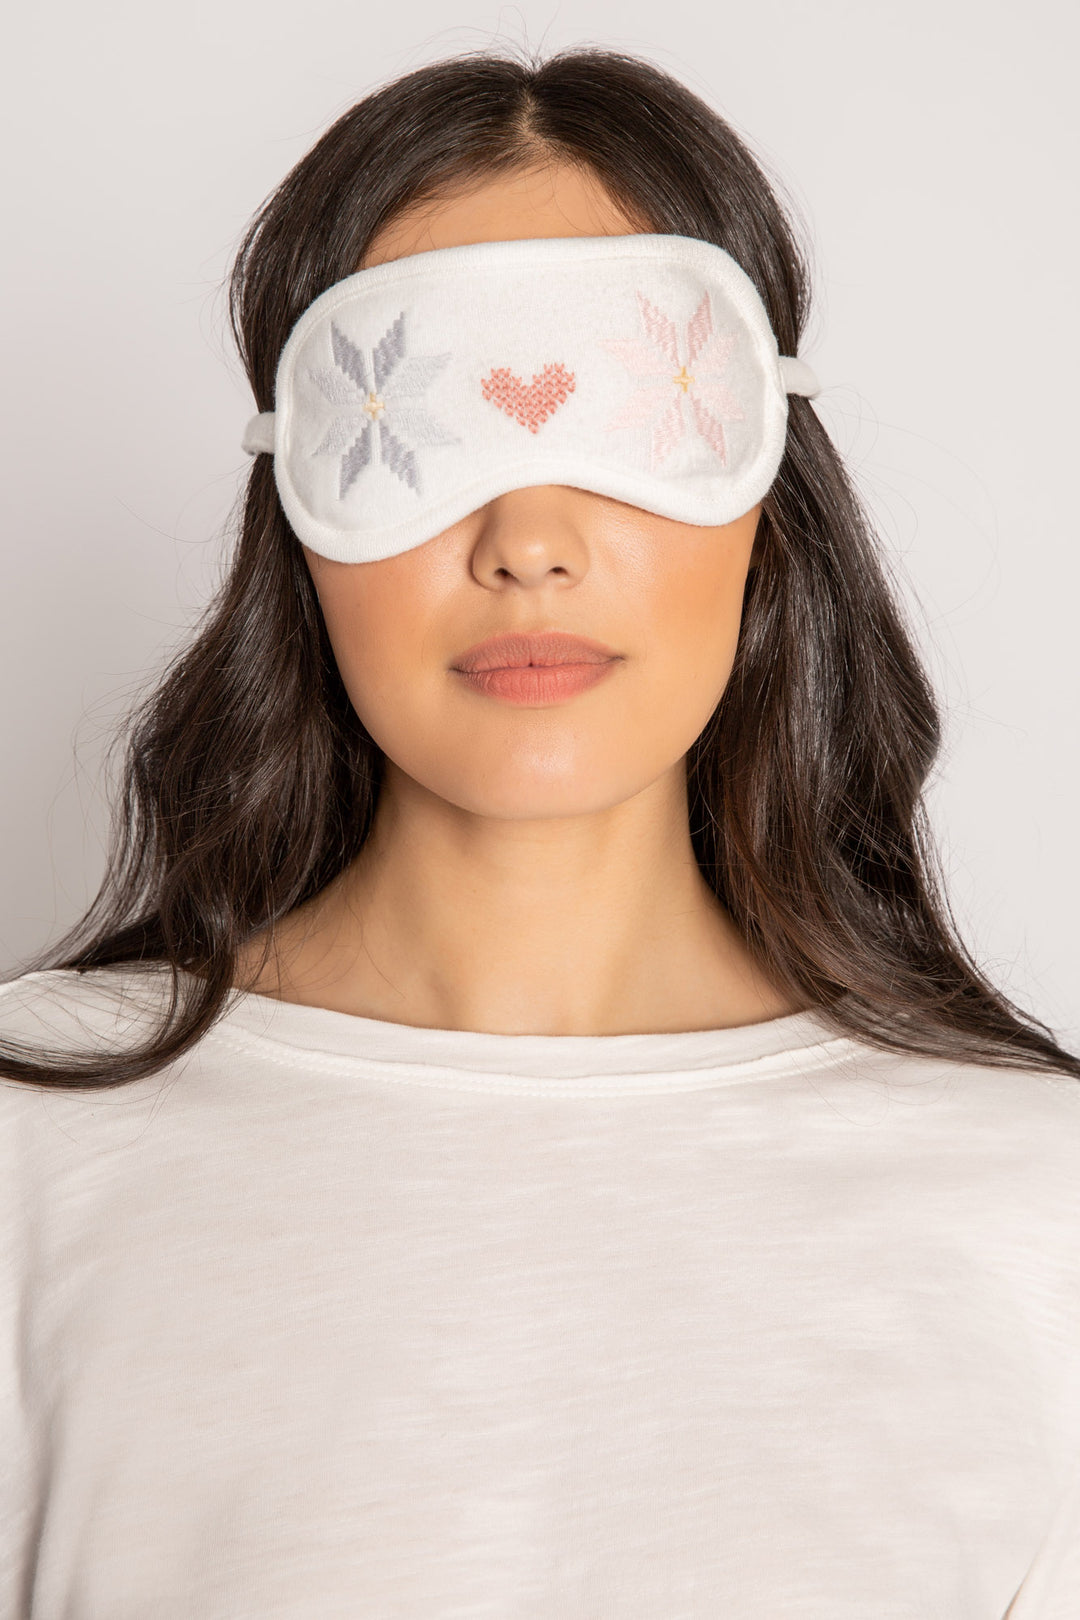 Sleep eye mask in ivory with embroidered snowflake & heart design. (7256838013028)